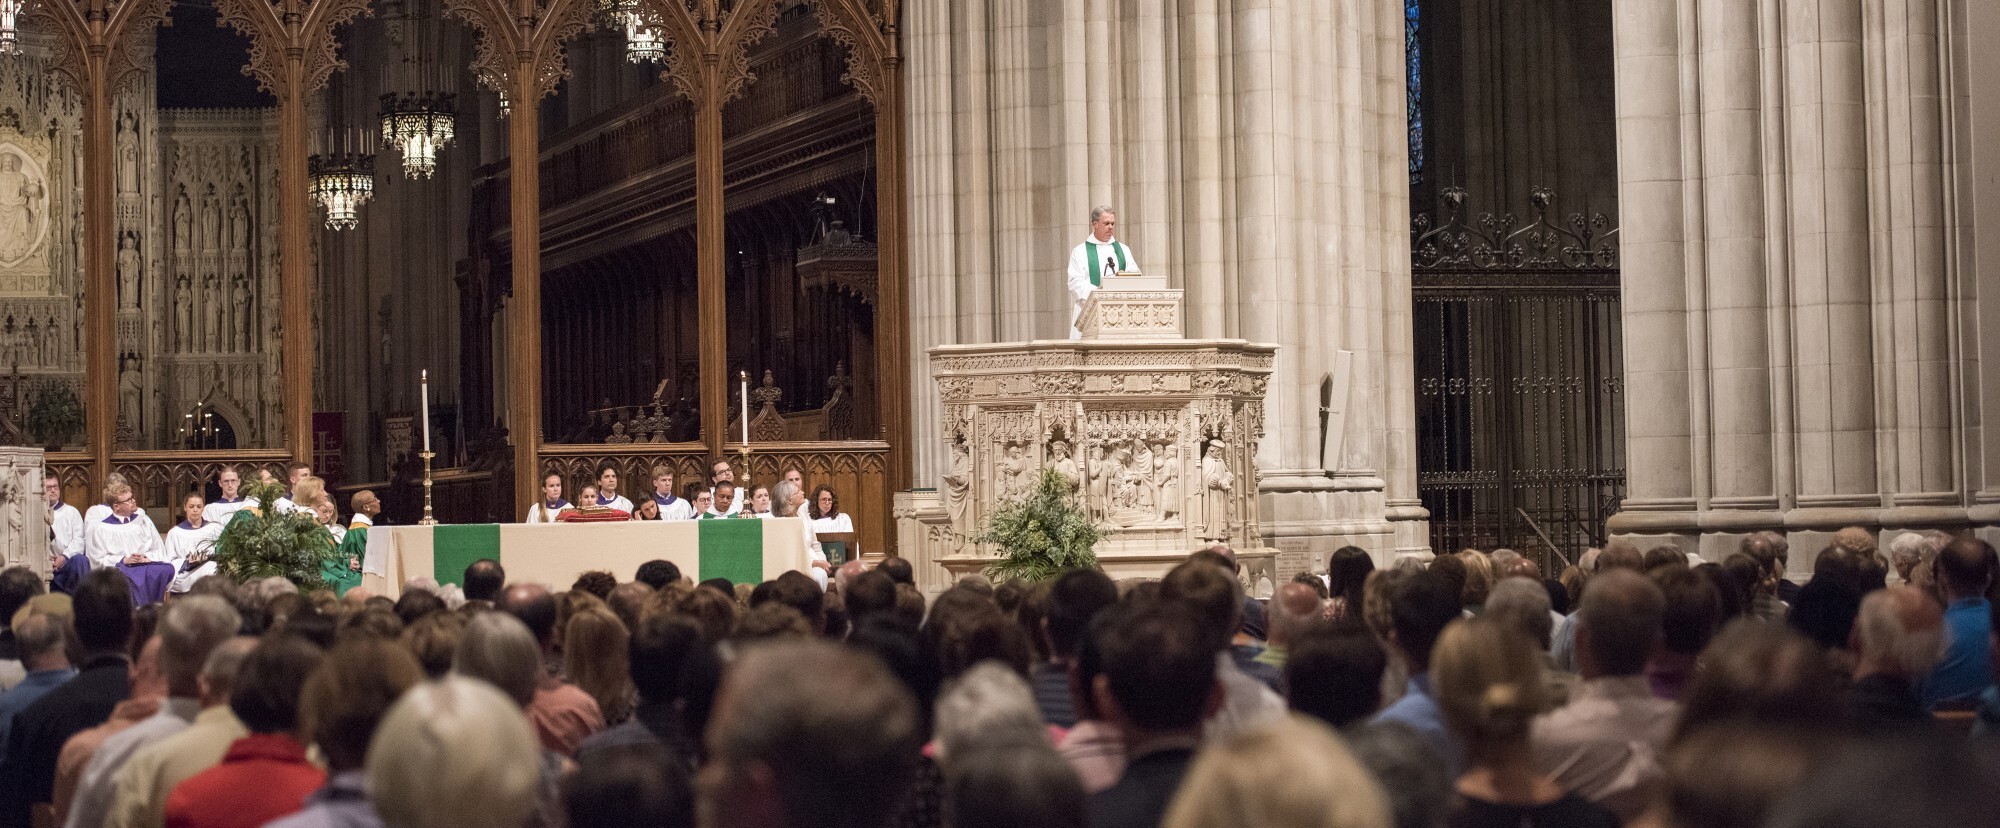 The Crossing: Sermons and Services from the National Cathedral